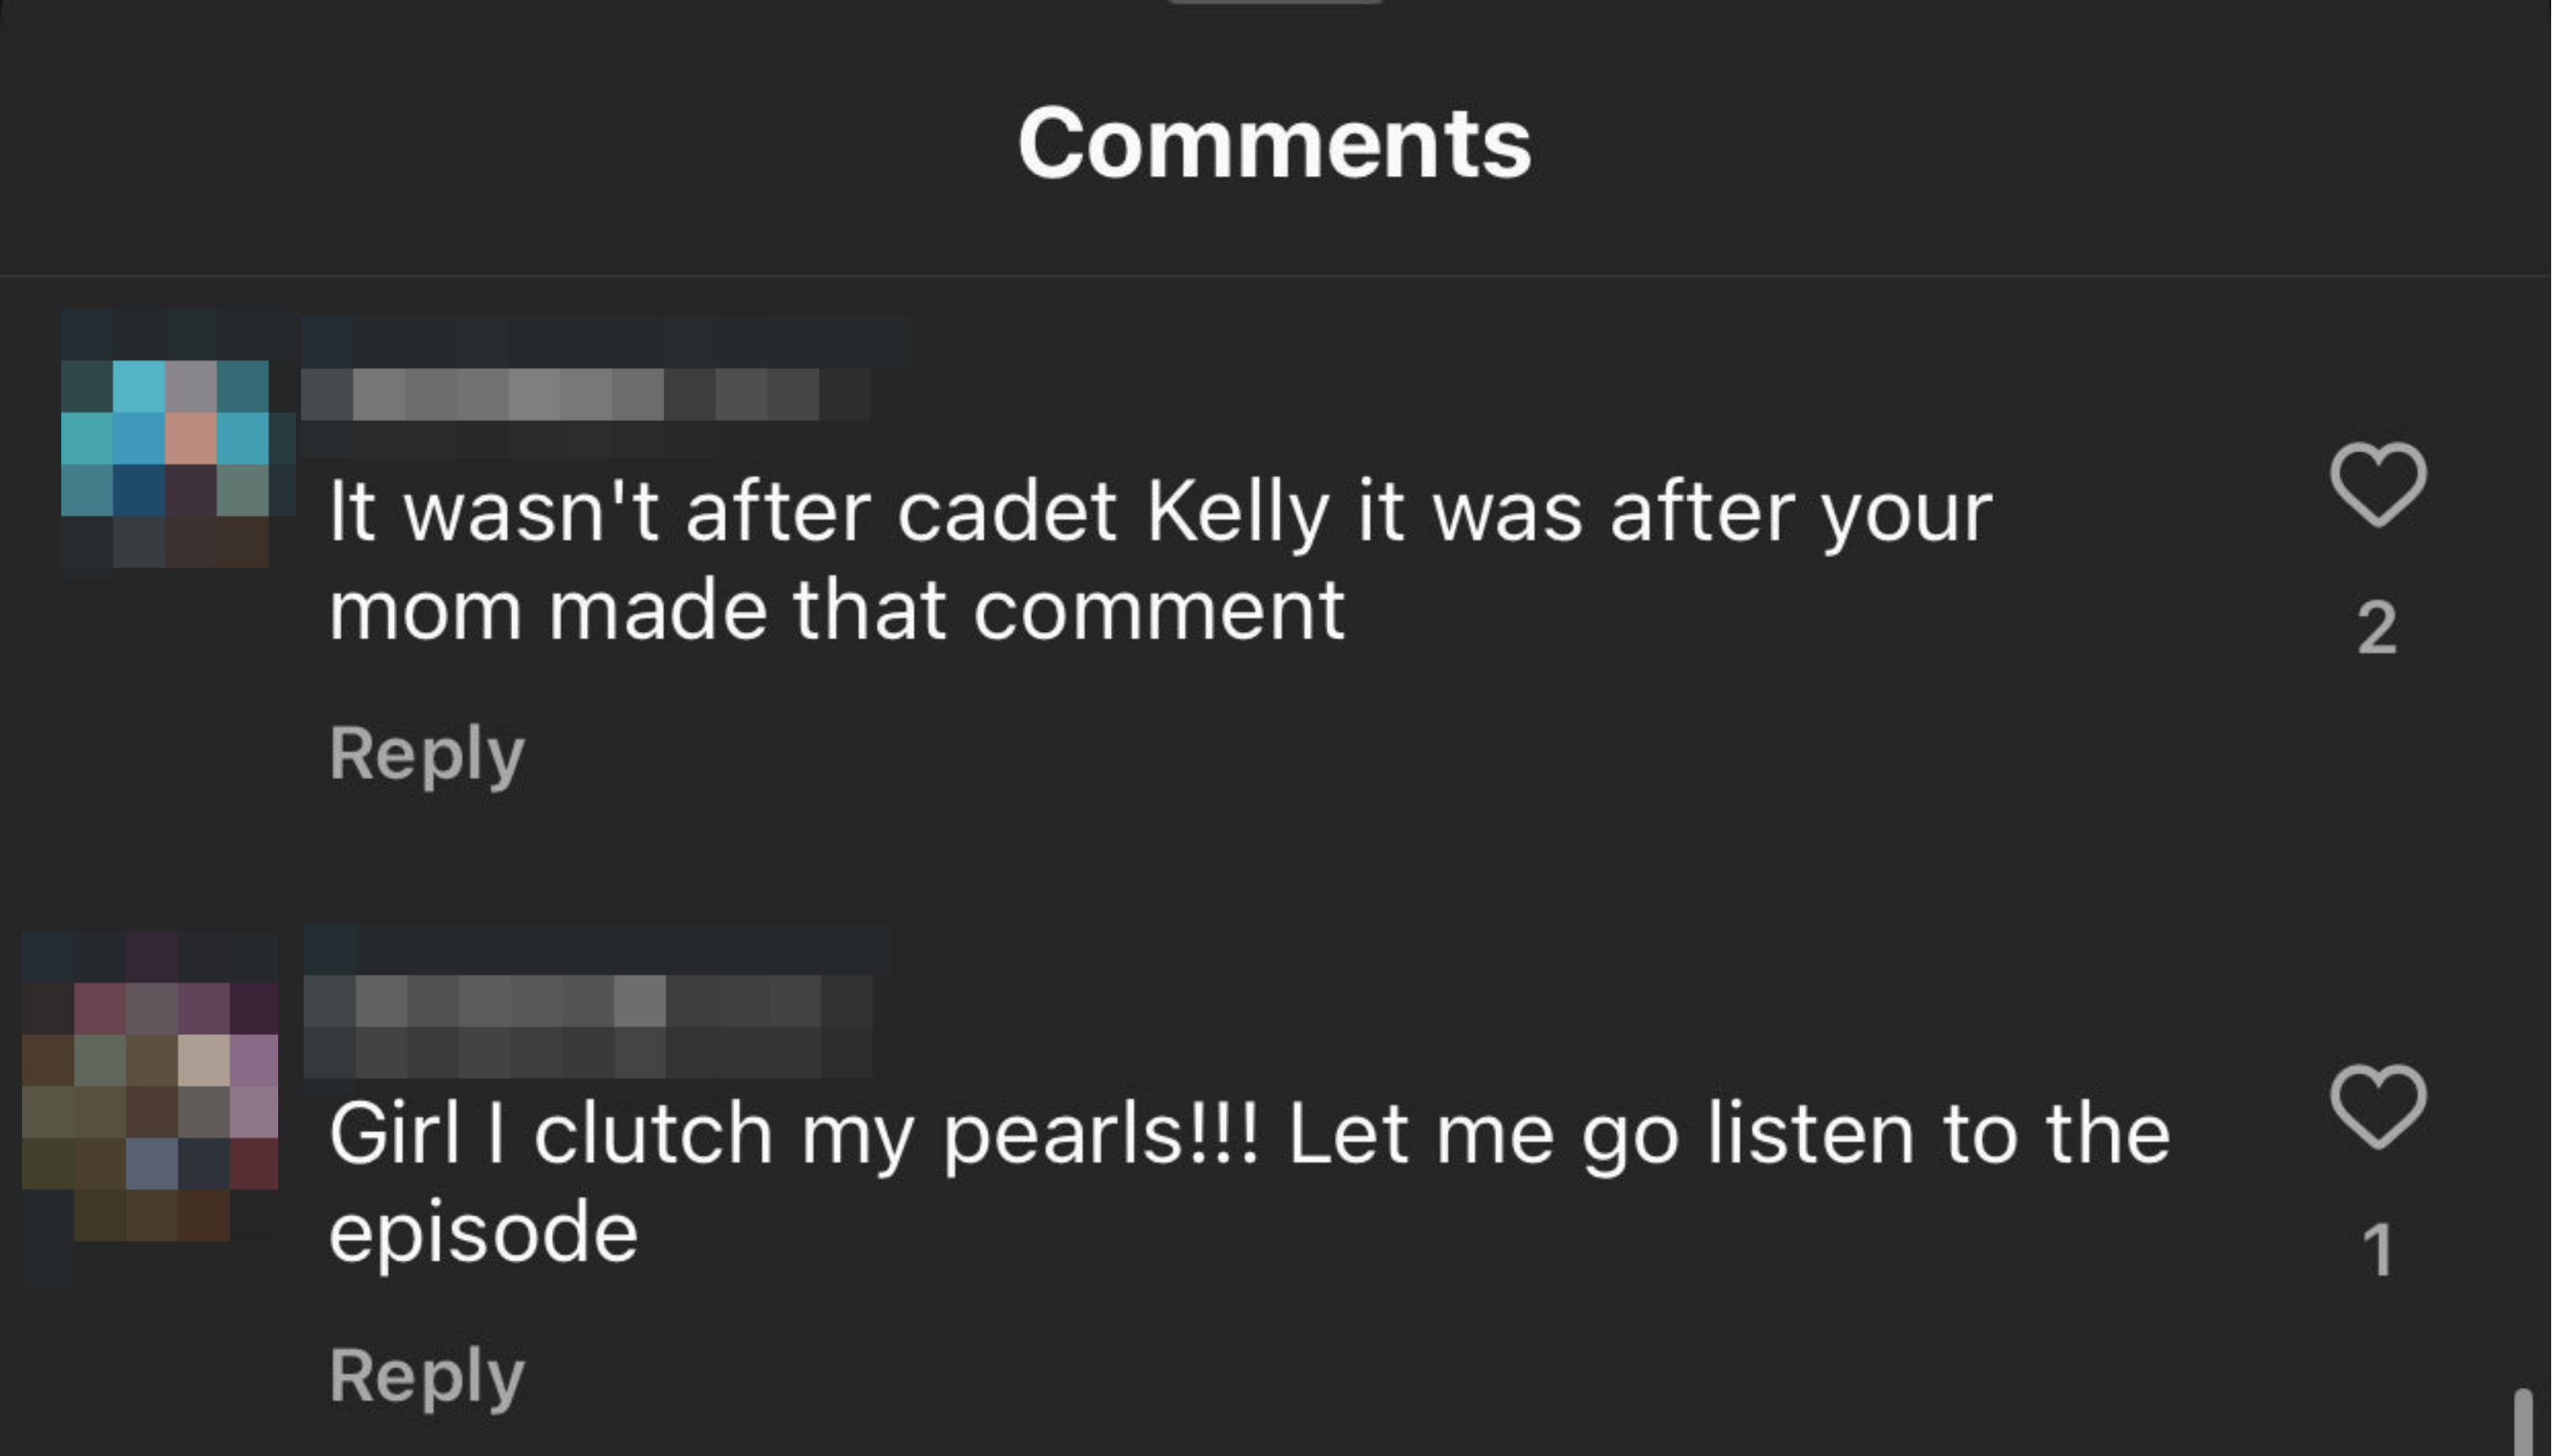 &quot;It wasn&#x27;t after Cadet Kelly it was after your mom made that comment&quot;